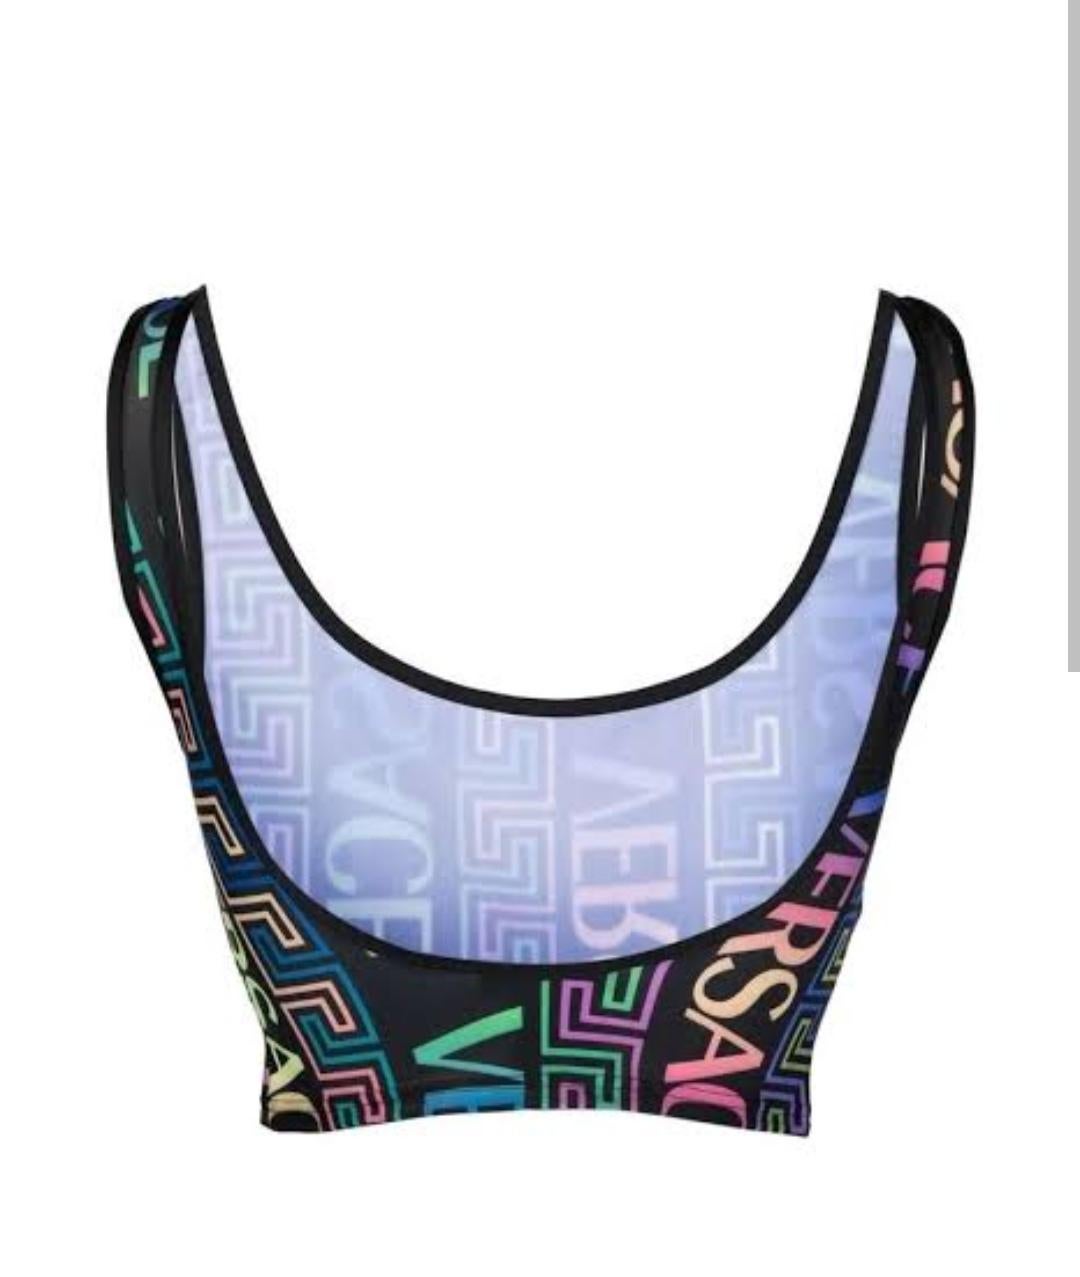 Sleeveless stretch jersey tank top in black featuring logo pattern and signature Greek key pattern in multicolor. Scoop neck collar. Cropped hem.

Supplier color: Multicolor

Body: 78% polyester, 22% elastane. Trim: 78% polyamide, 22%